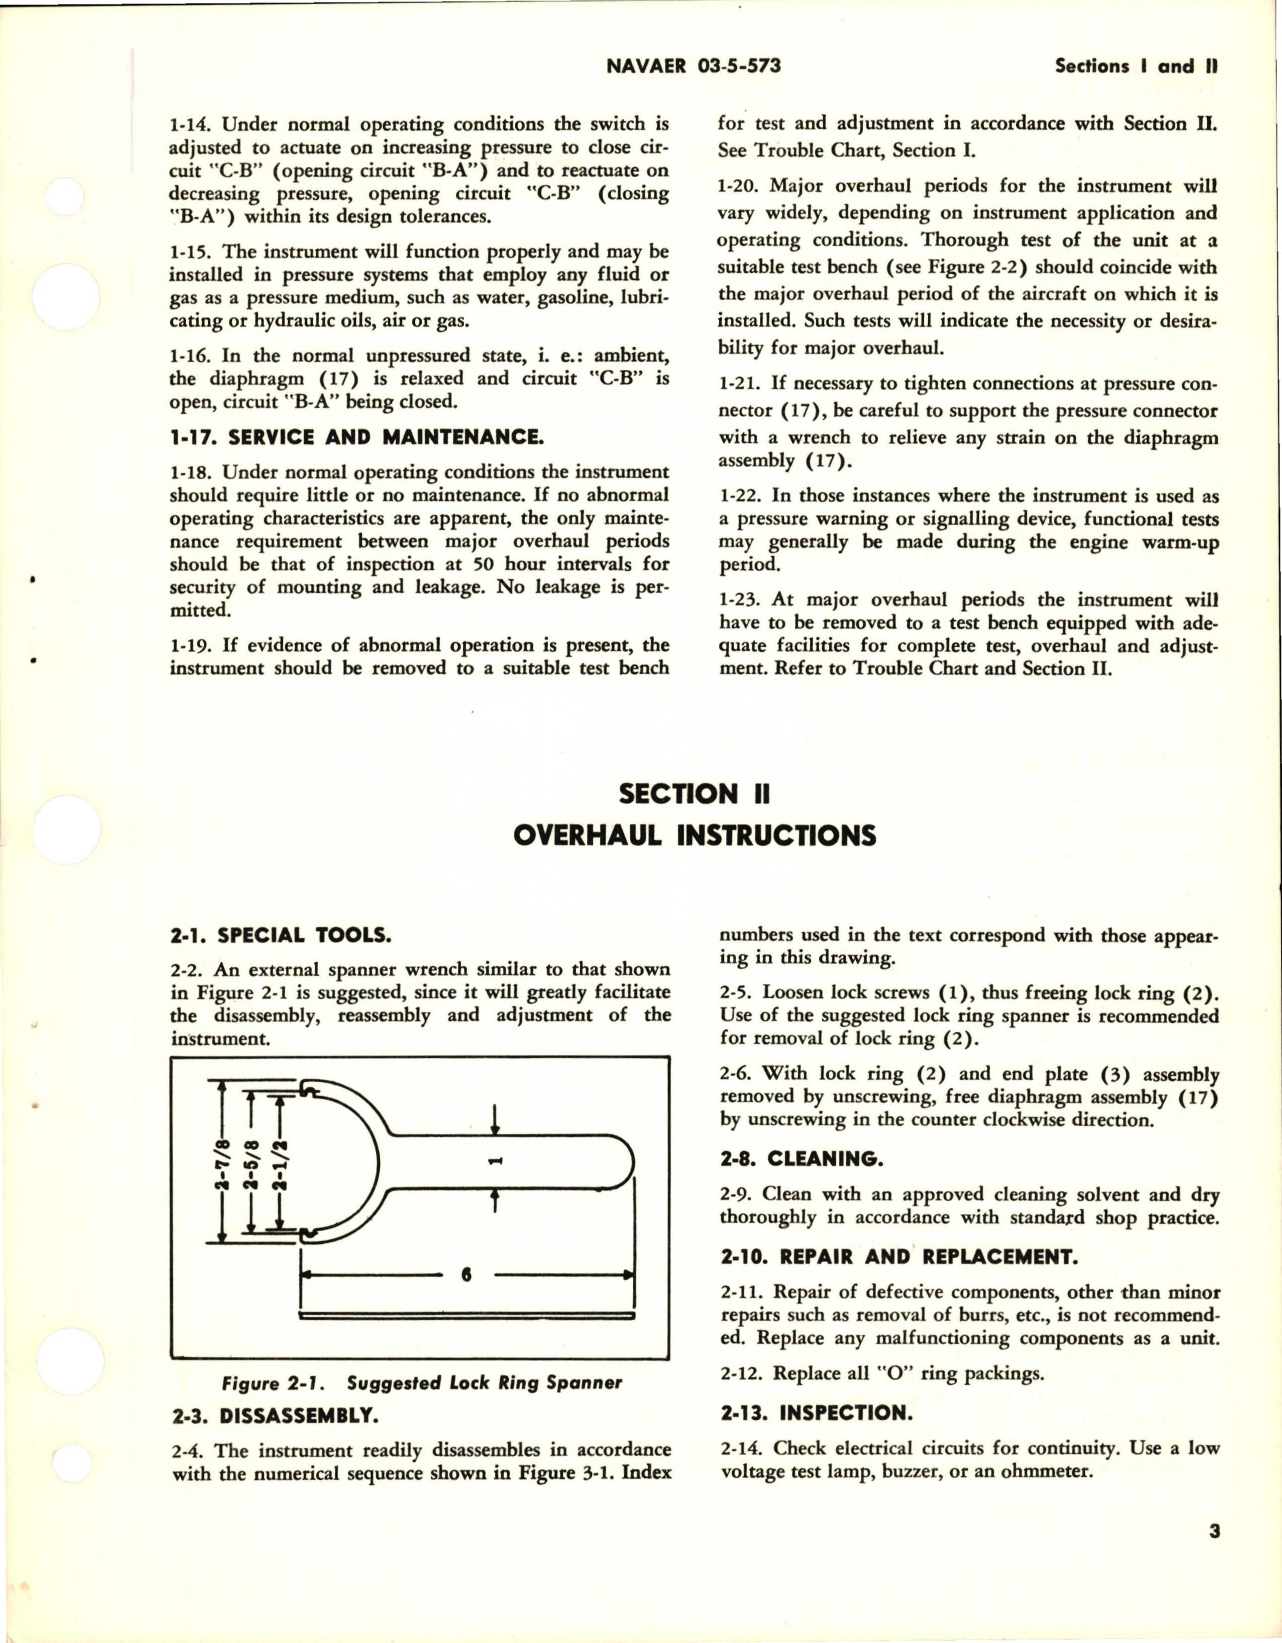 Sample page 5 from AirCorps Library document: Operation, Service and Overhaul Instructions with Parts Breakdown for Pressure Actuated Switch - Model 417-22B-39